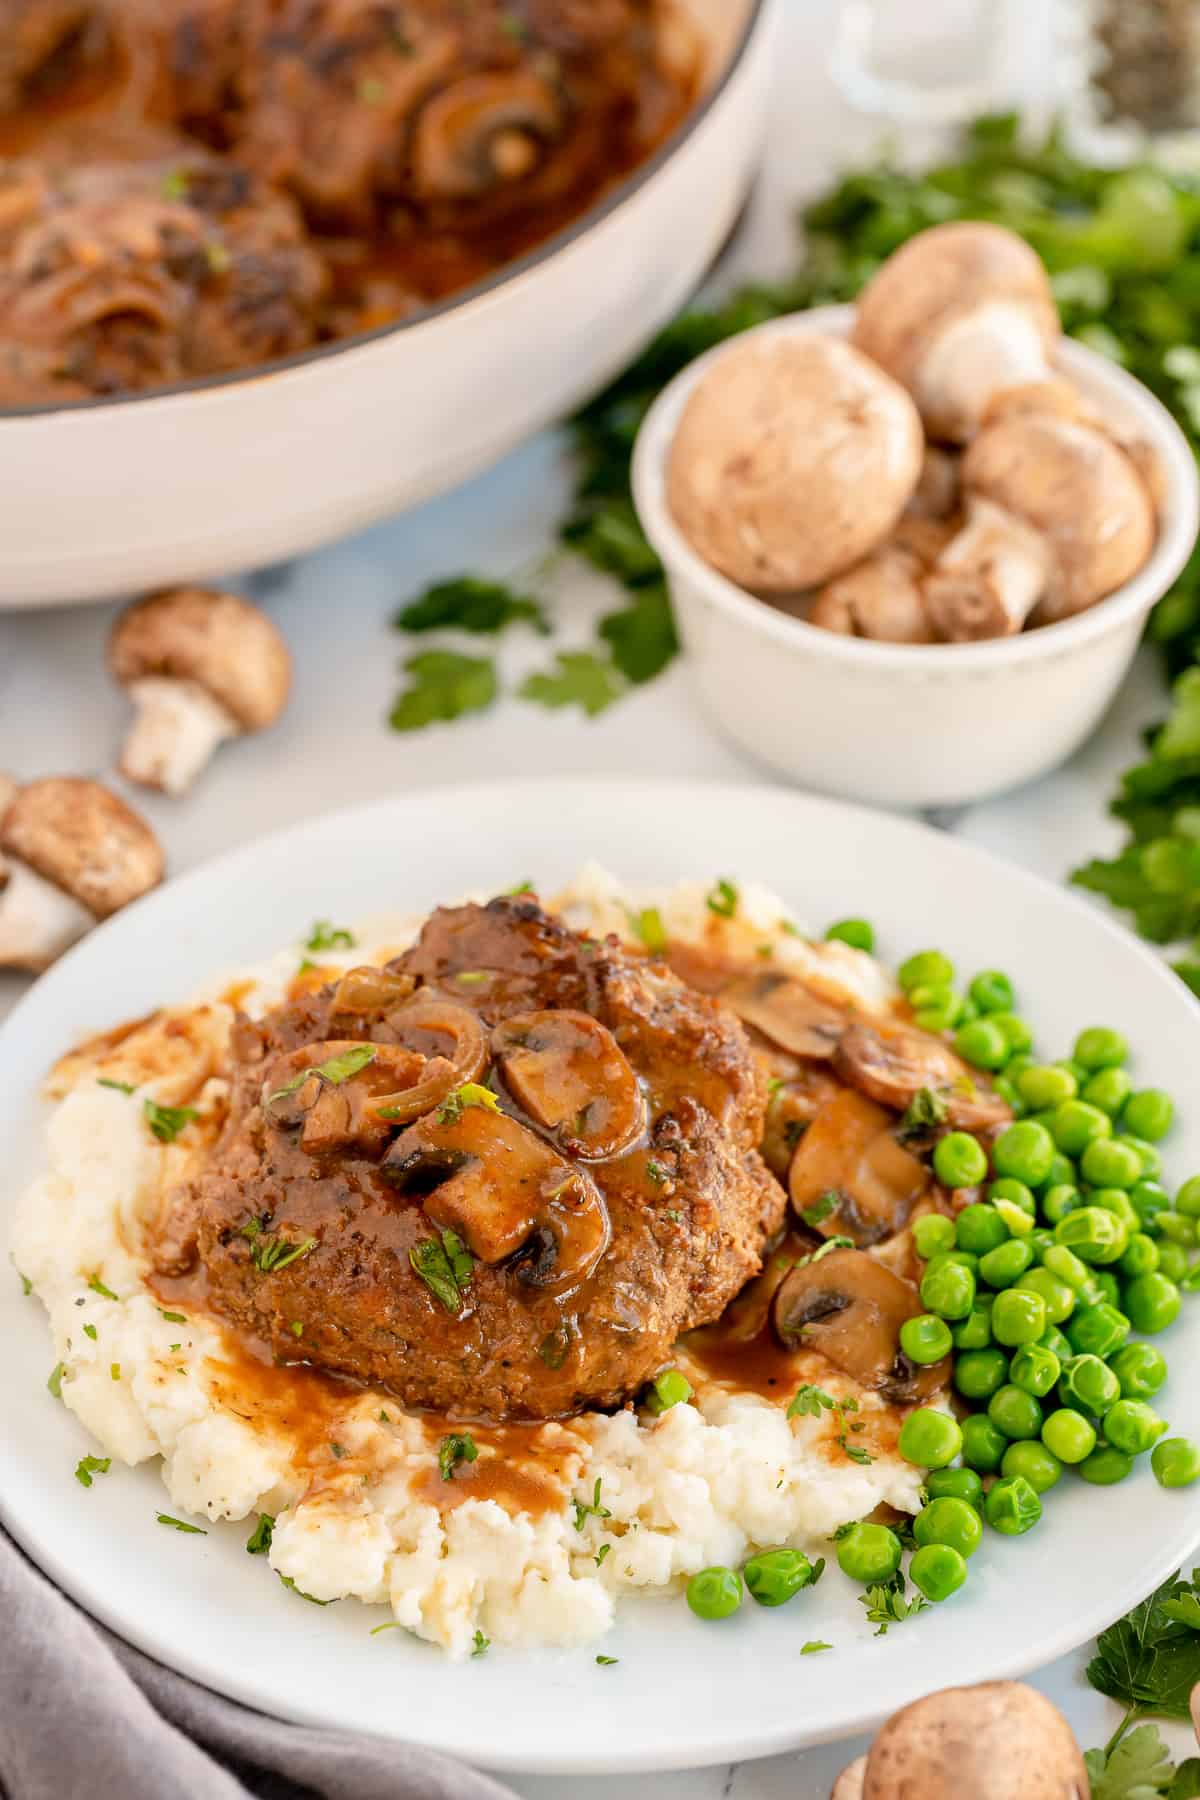 Salisbury steak and gravy on a plate with mashed potatoes and peas.